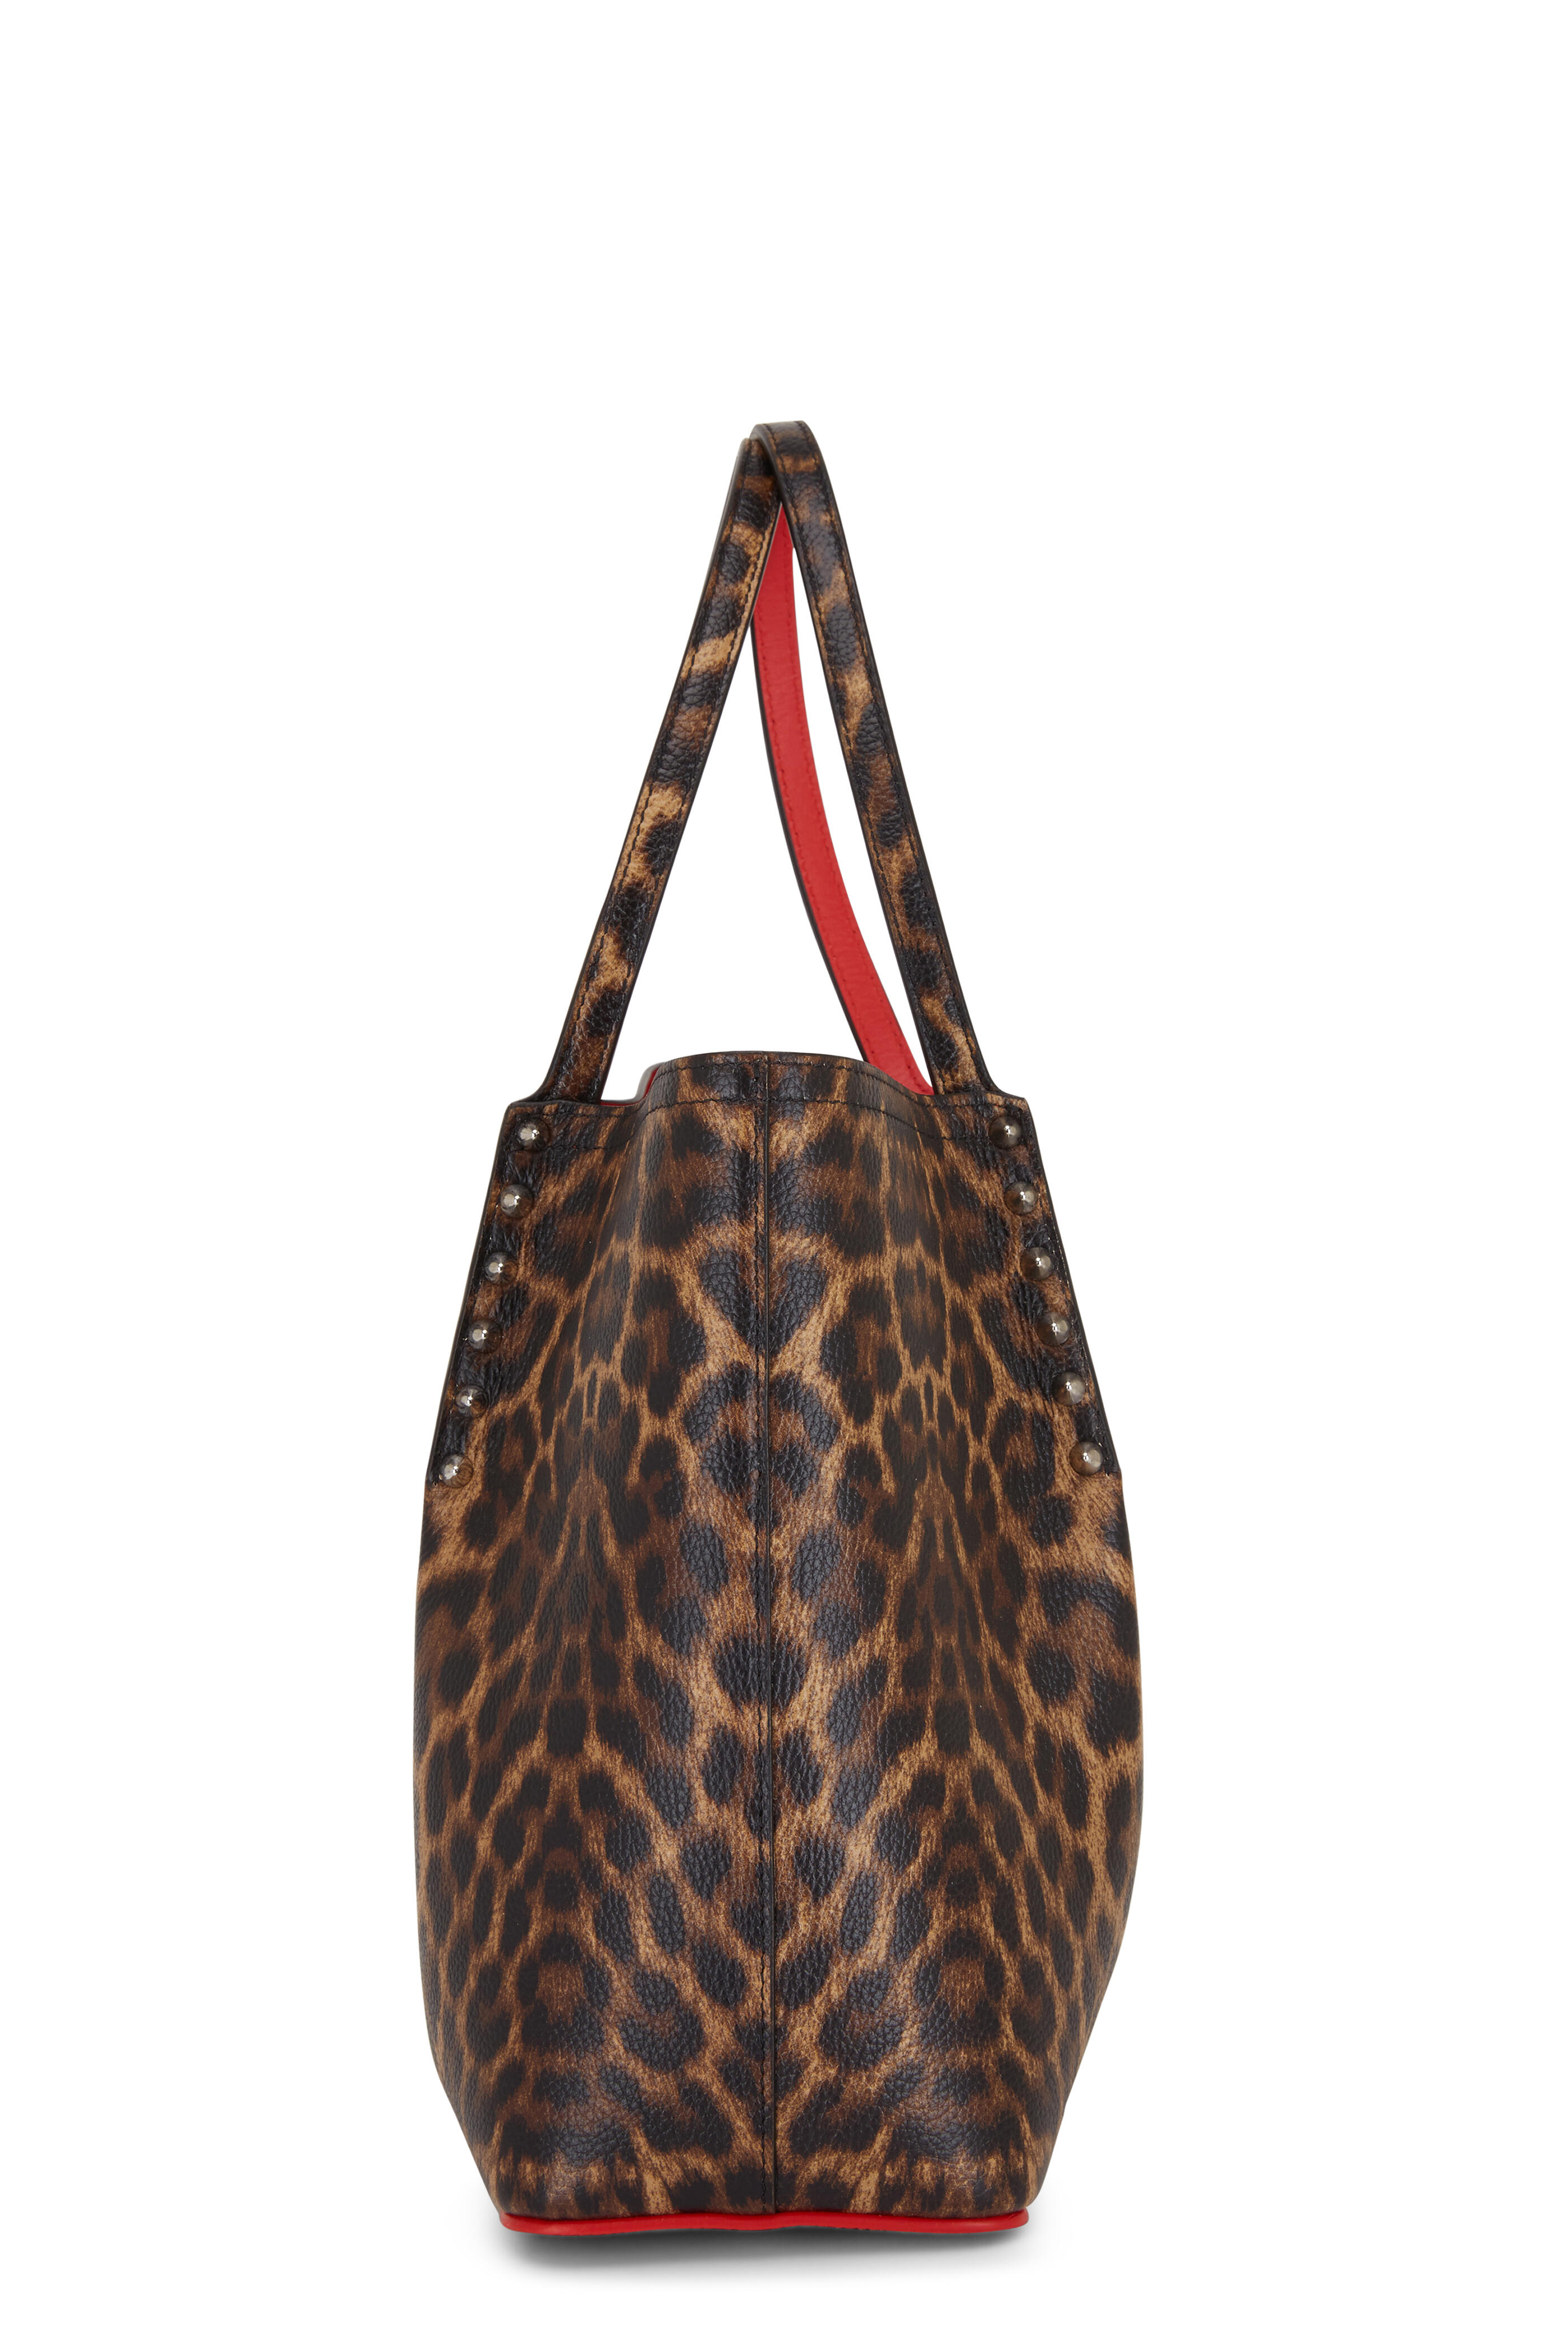 Christian Louboutin Leopard Print Leather Pouch